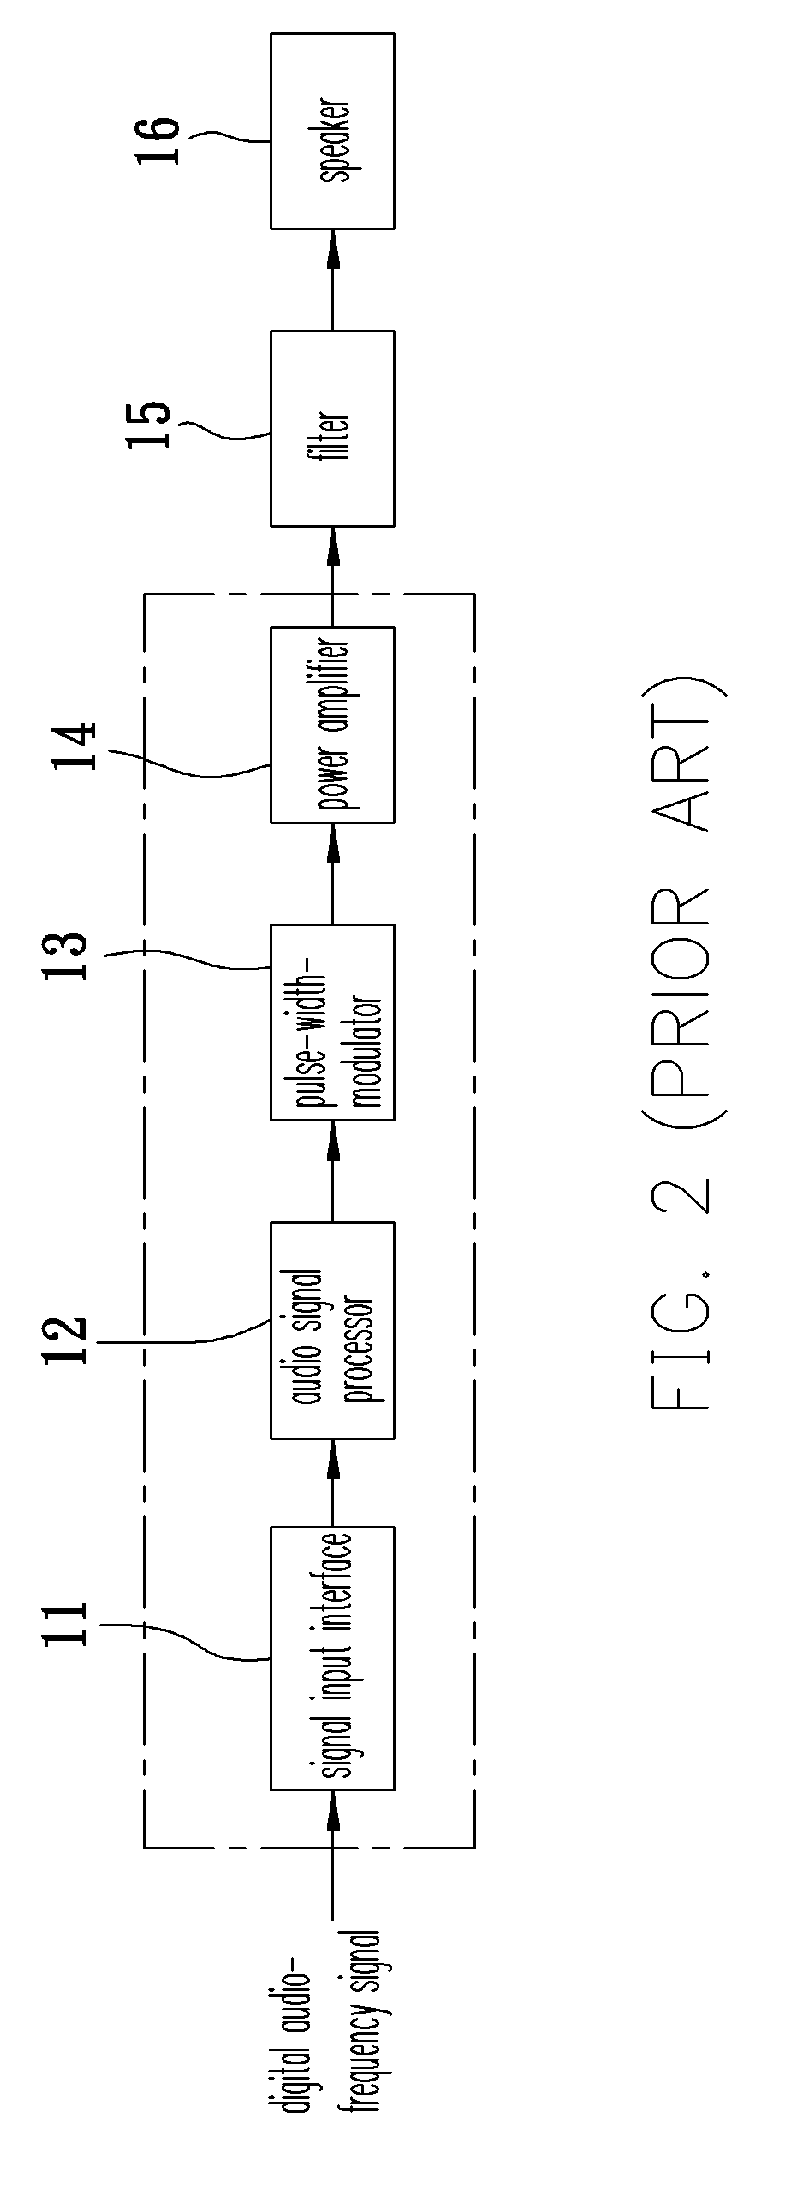 Anti-pop device for audio amplifiers